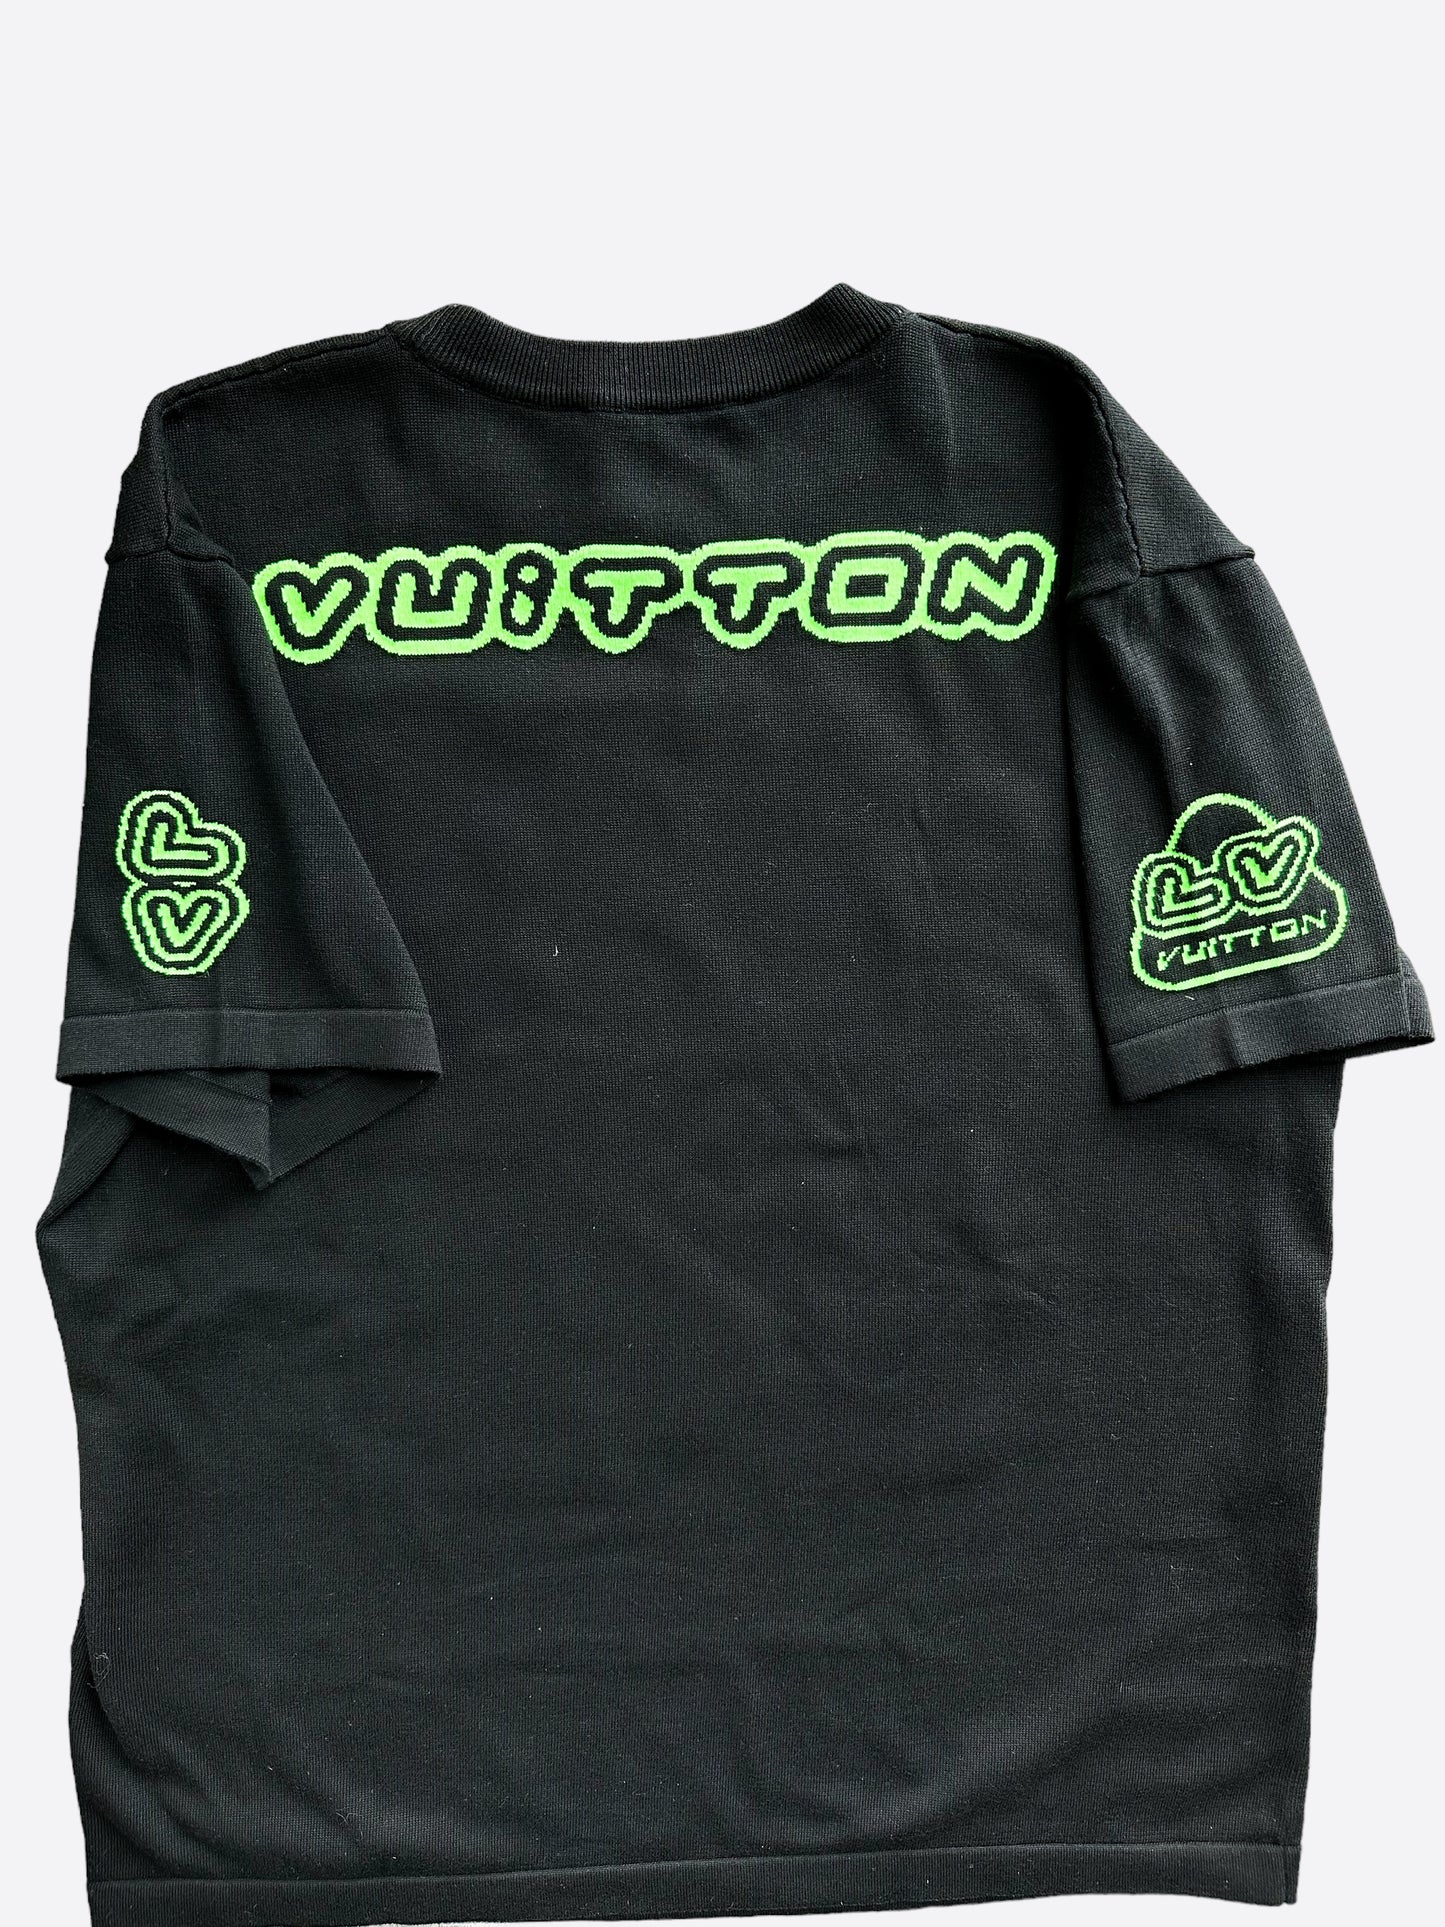 Louis Vuitton 1854 Graphic Knit Tee Shirt Brand New Size L for Sale